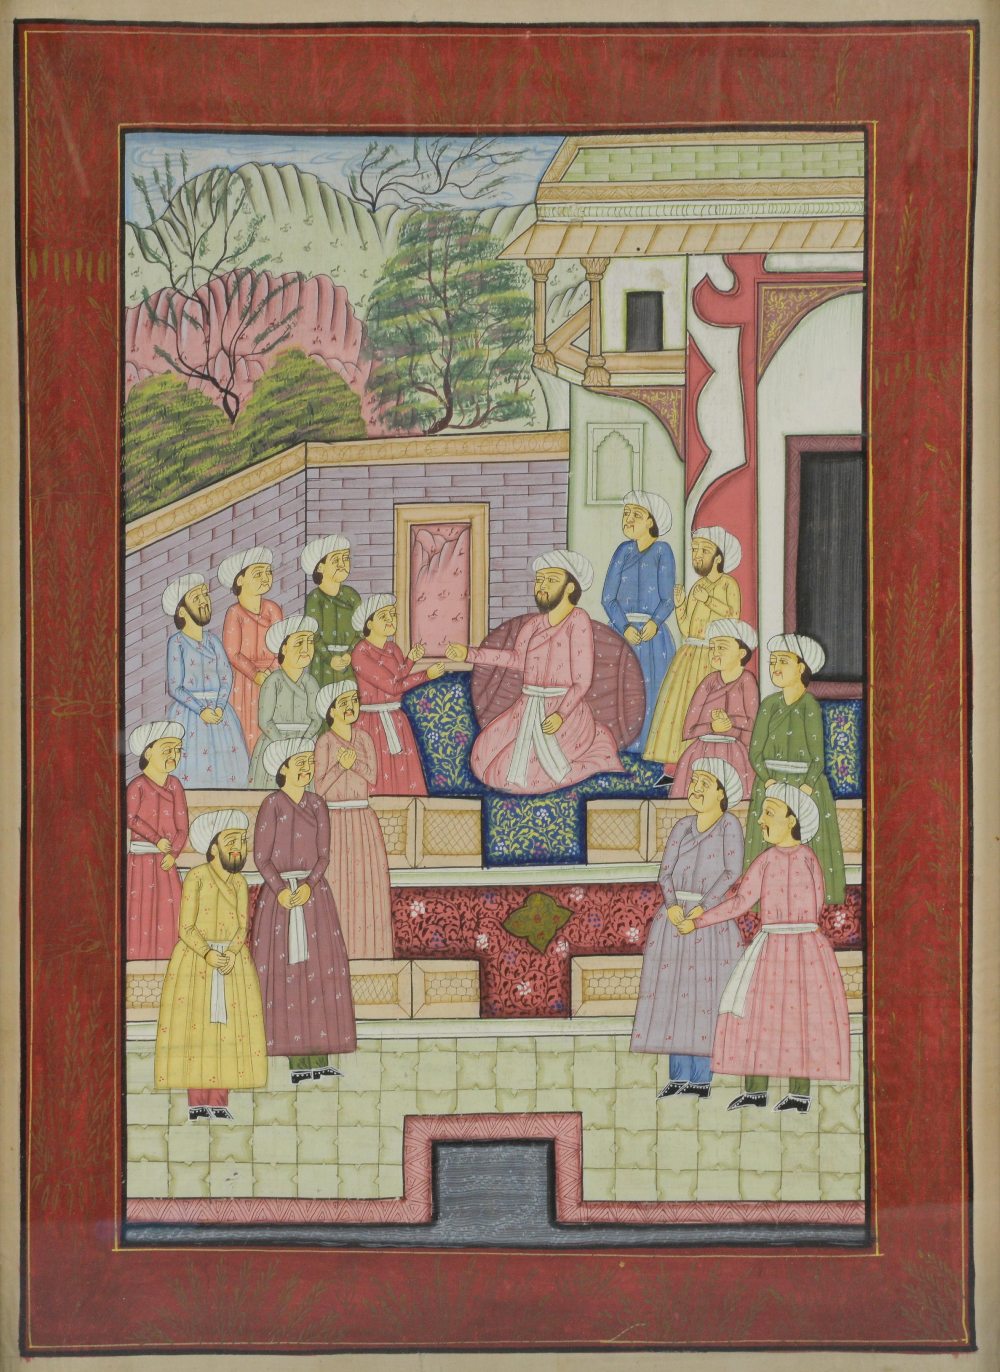 Indian miniature painting on fabric depicting a court scene with a group of men gathered around a